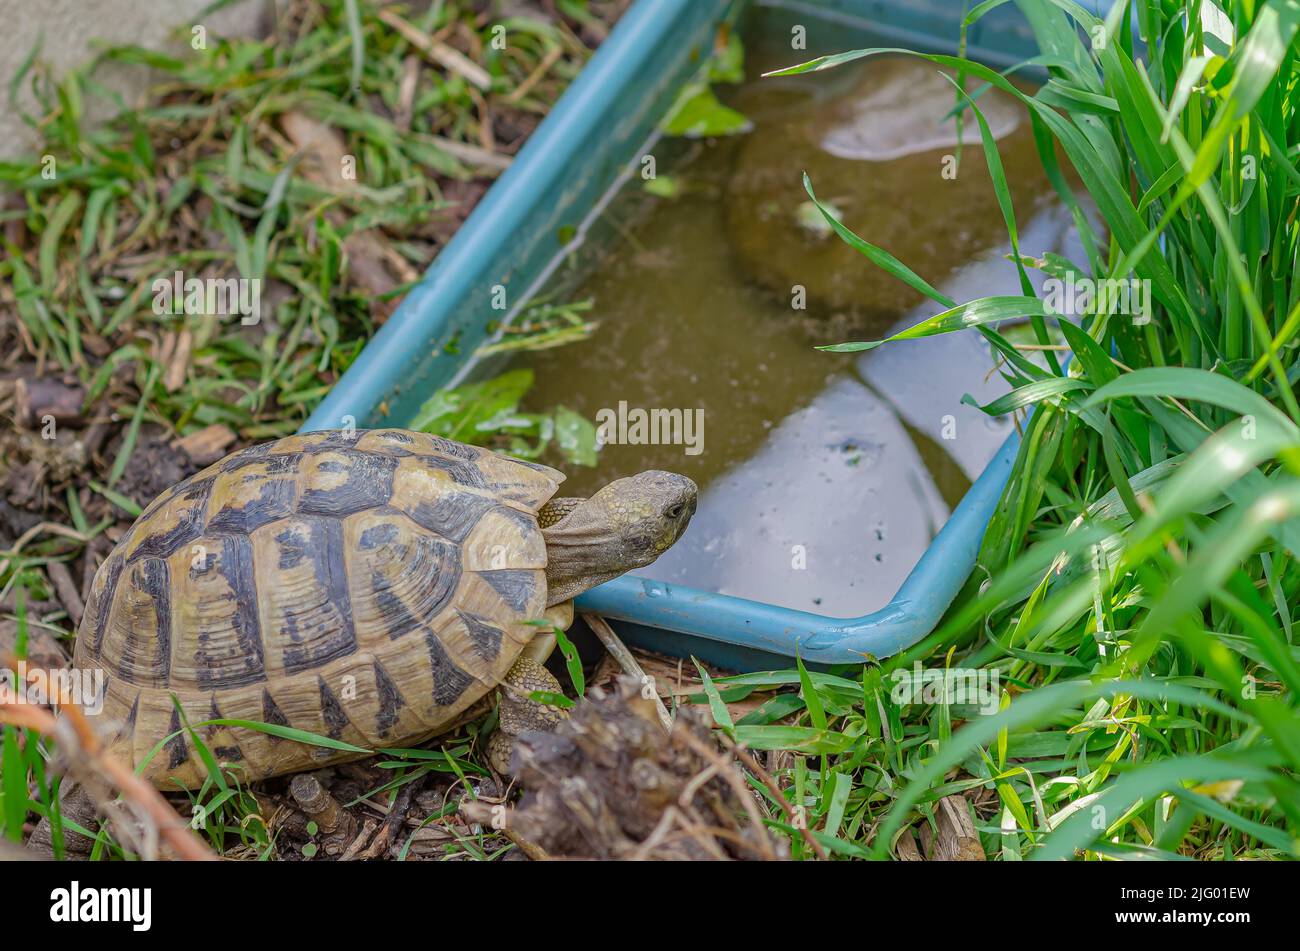 Top view of turtle going to drink water. Reproduction of turtles at home. Stock Photo